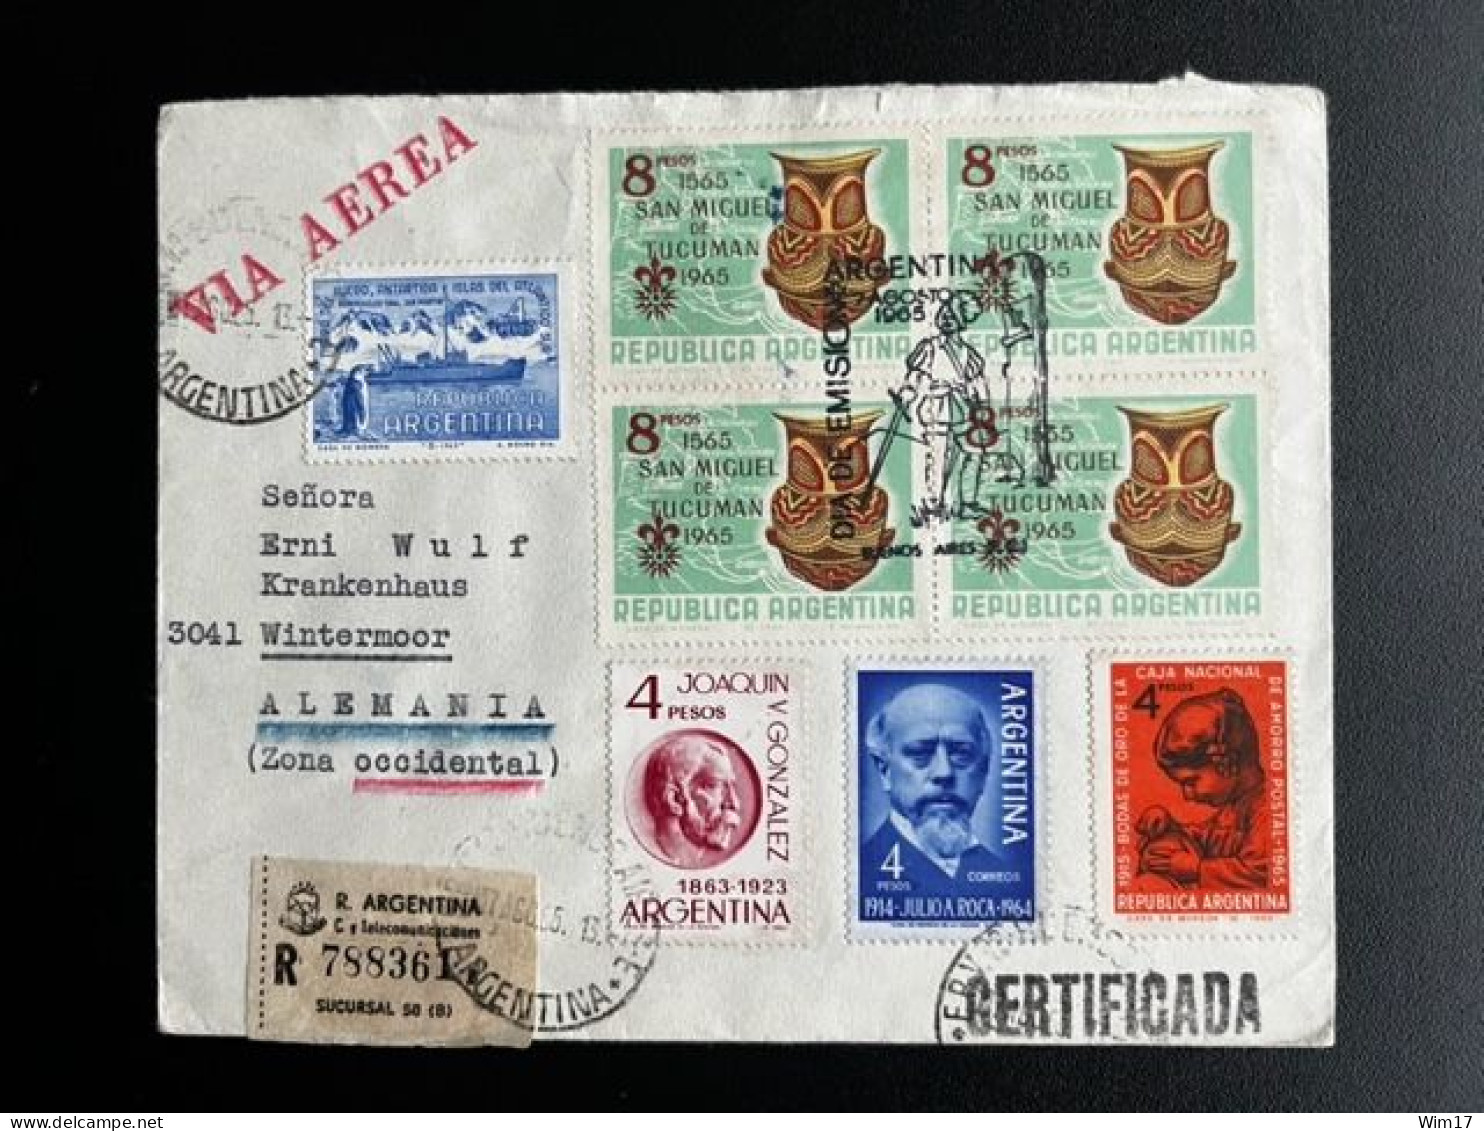 ARGENTINA 1965 REGISTERED AIR MAIL LETTER BUENOS AIRES TO WINTERMOOR 07-08-1965 CERTIFICADO - Lettres & Documents